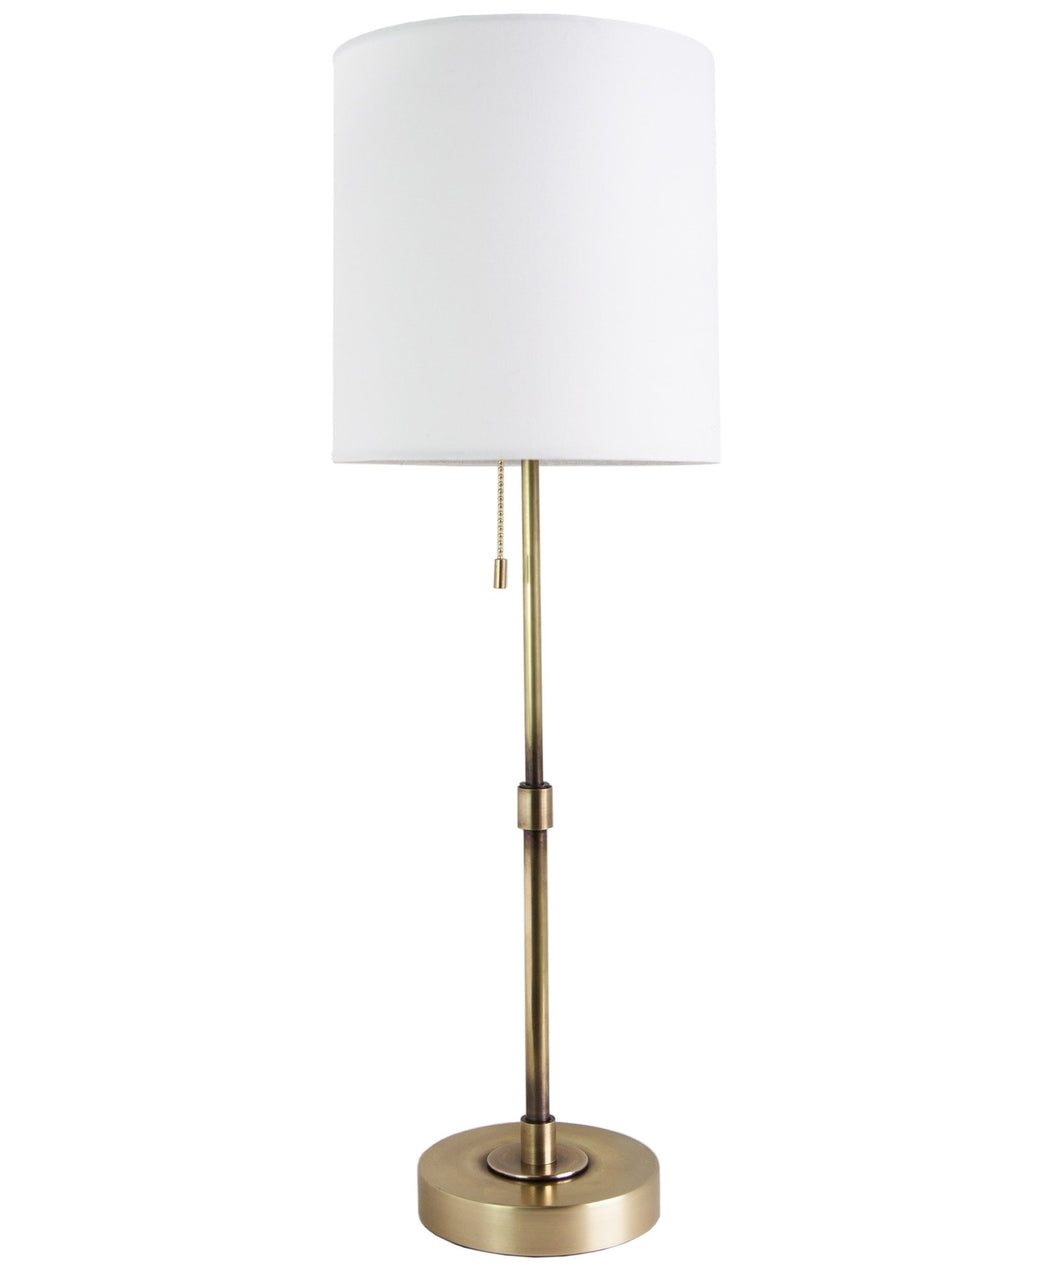 Annapolis Tall Table Lamp, Antique Brass